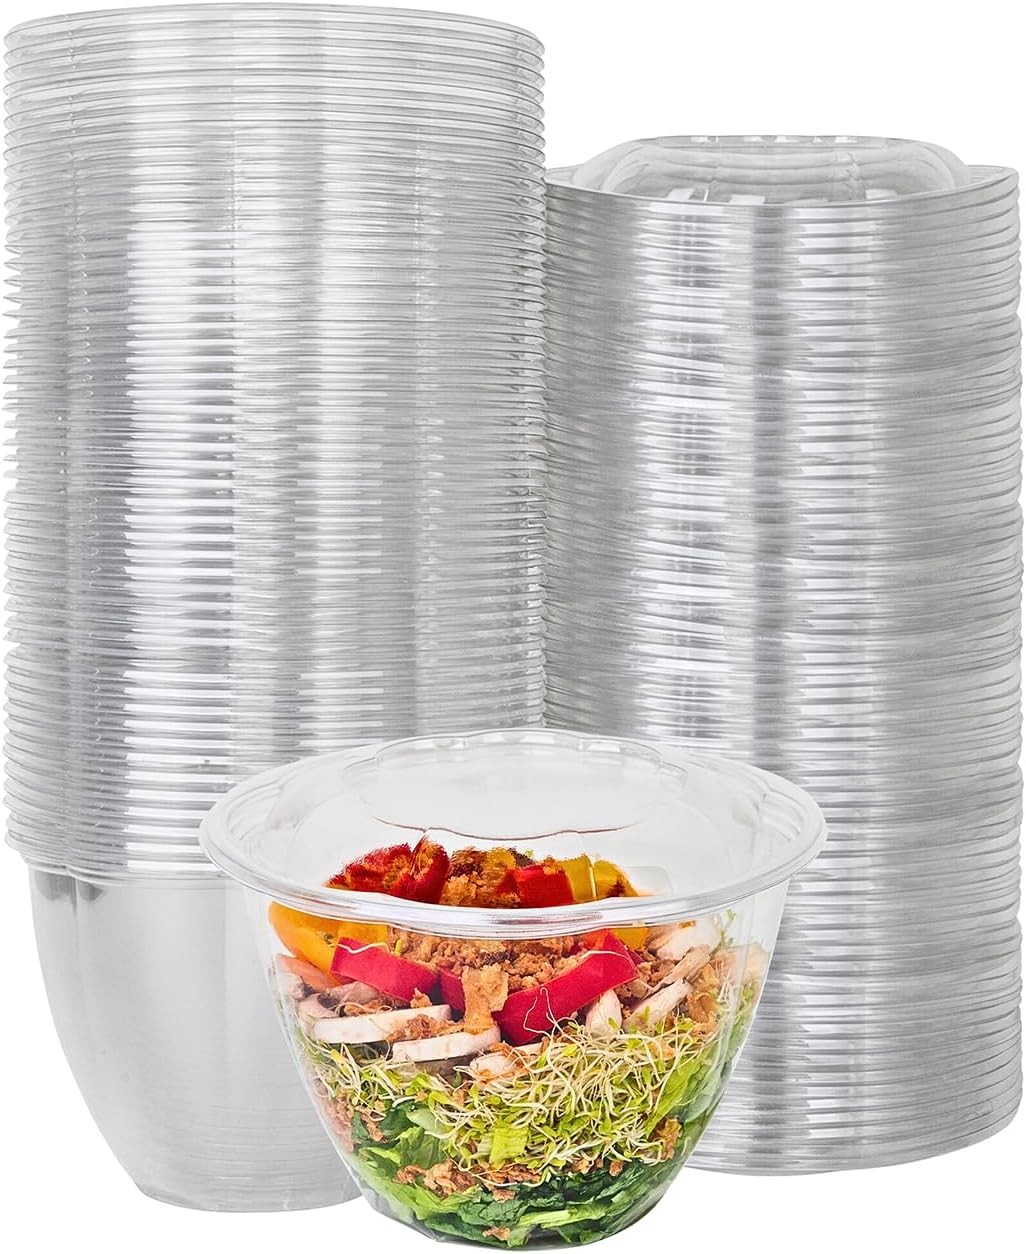 Fit Meal Prep 150 Pack 32 oz Clear Plastic Salad Bowls with Airtight Lids,  Disposable To Go Salad Containers for Lunch, Meal, Party, BPA Free Clear